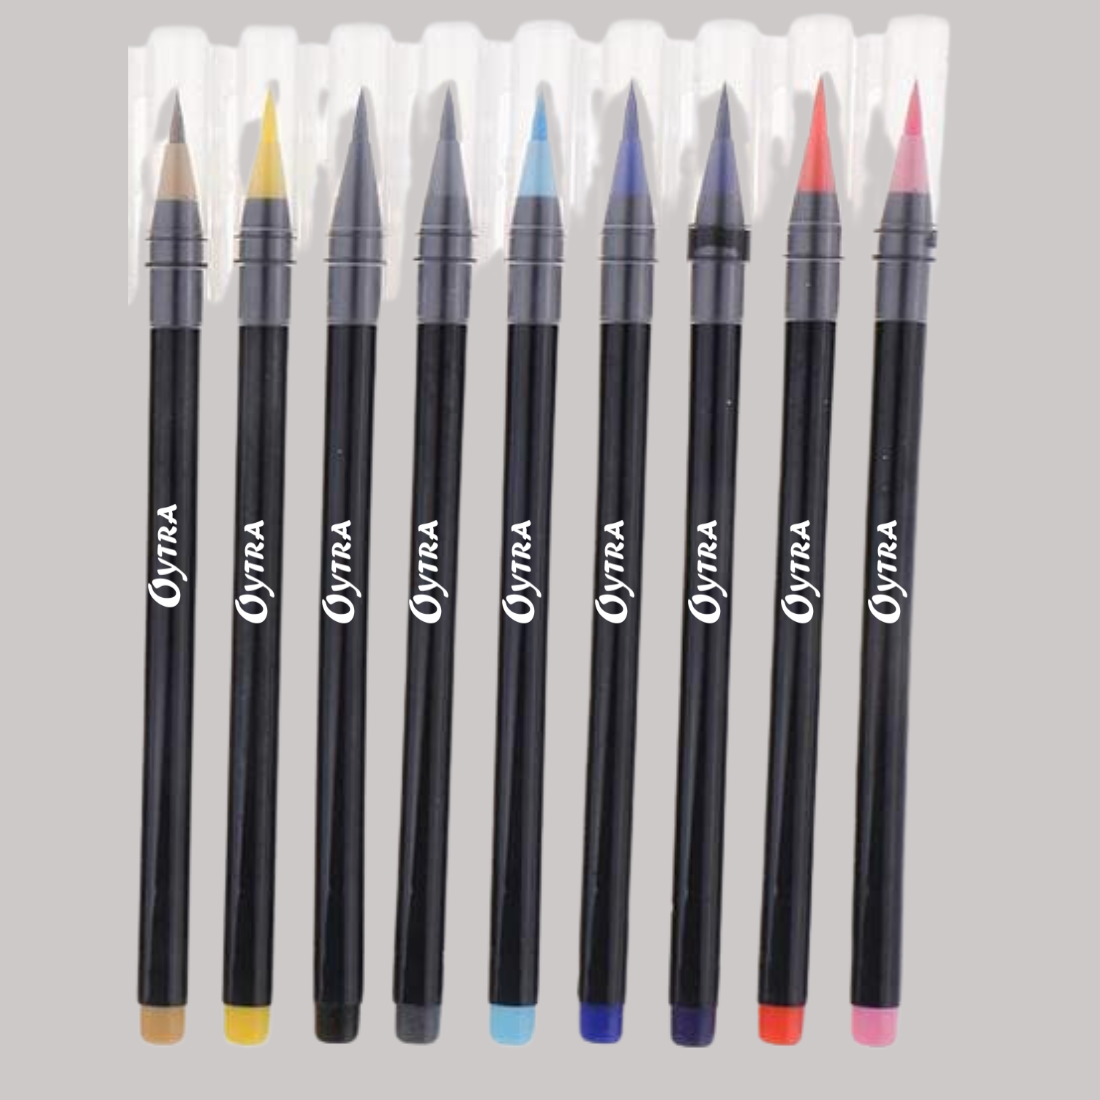 Alcohol touch cool marker white body colors twin head art marker pens for  manga & impression